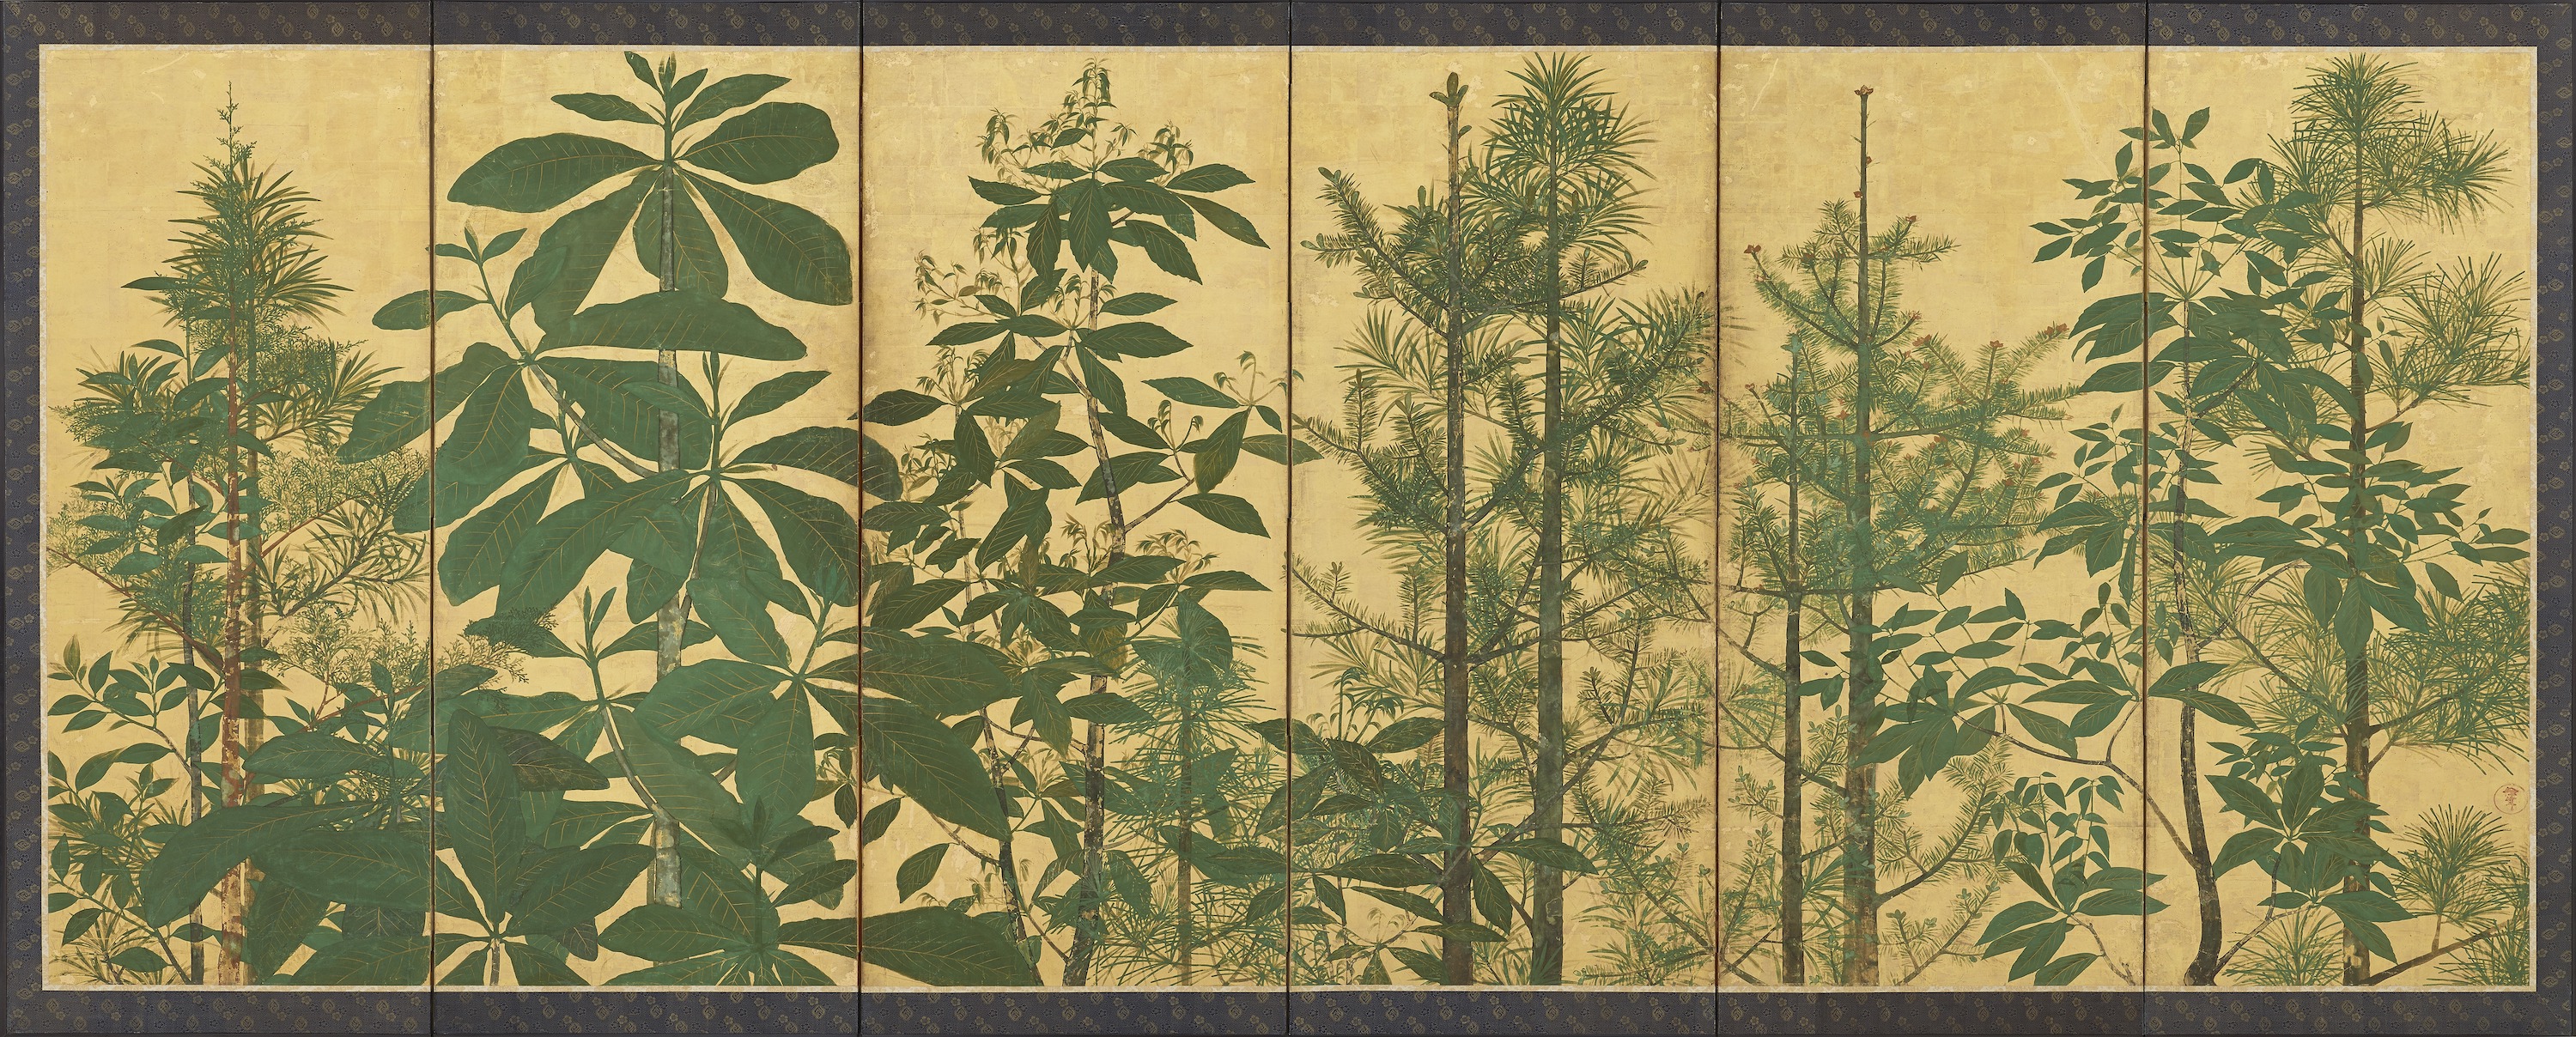 Trees by  Master of I-nen Seal - Edo period, mid 17th century - 154 x 357.8 cm National Museum of Asian Art